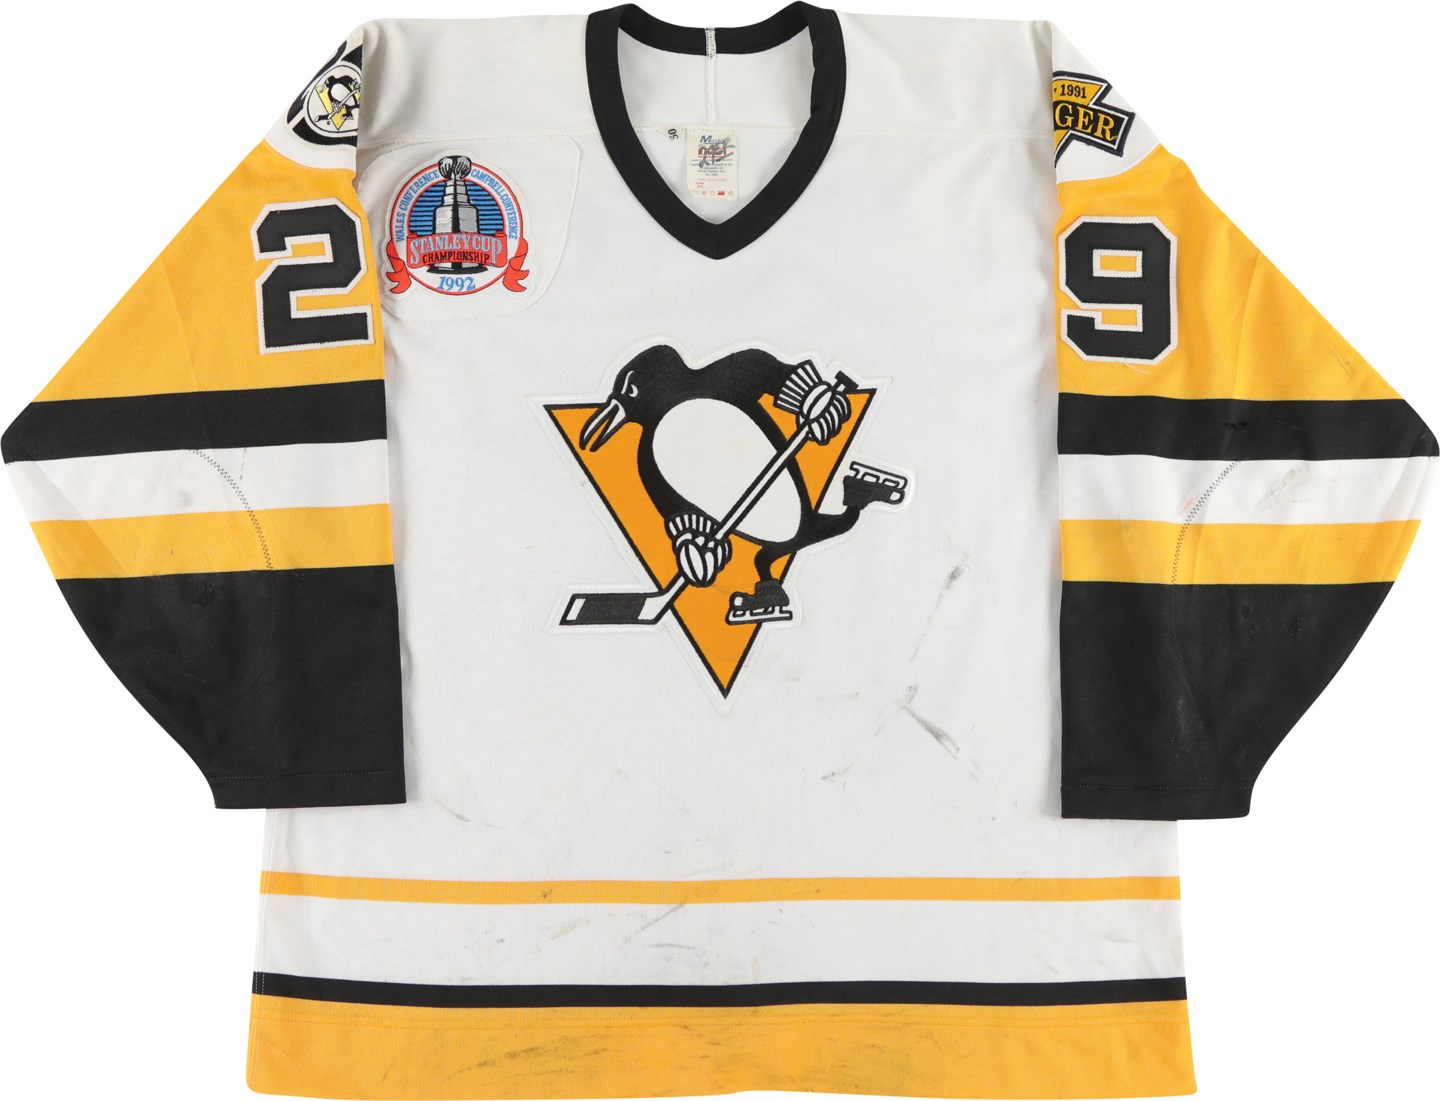 Hockey - 1992 Phil Bourque Stanley Cup Finals Game 1 Pittsburgh Penguins Game Worn Jersey - Bourque's Final Playoff Goal (Photo-Matched & Bourque LOA)